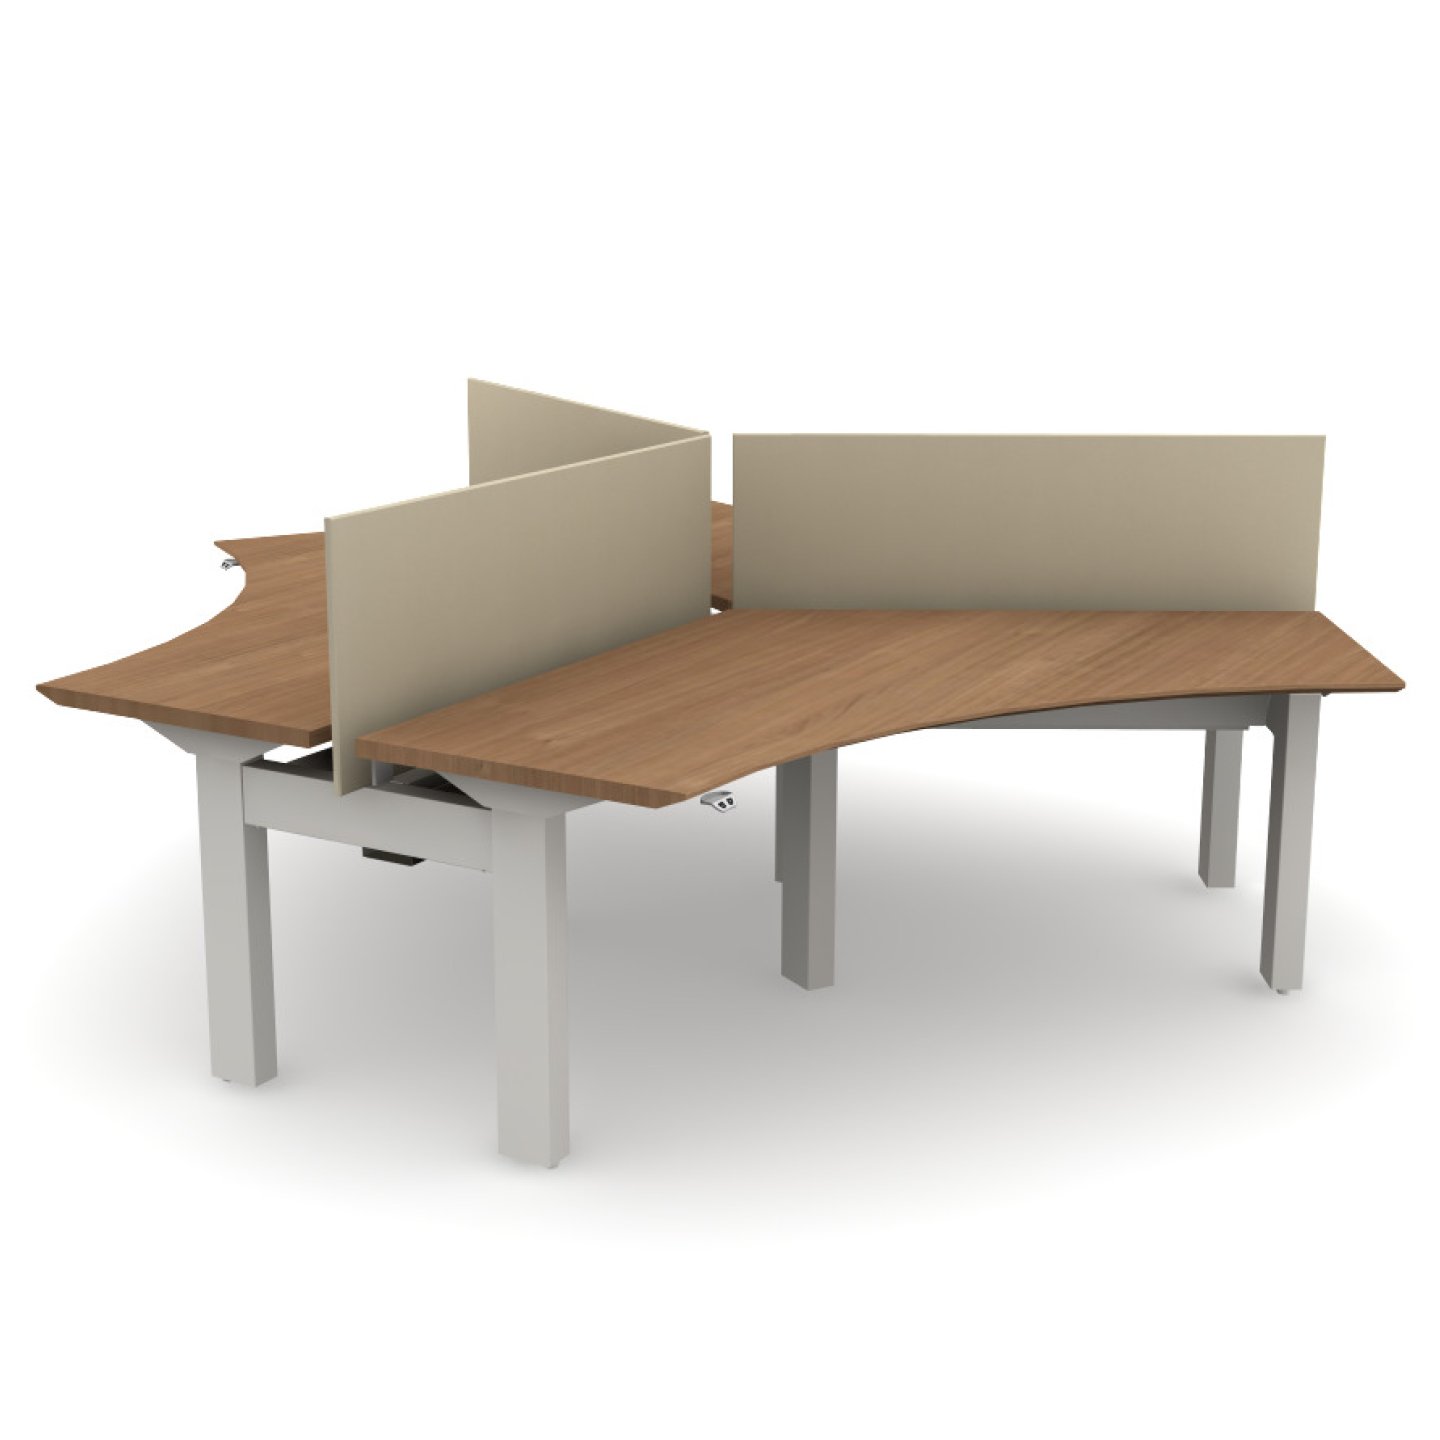 Haworth Planes Value Model Height Adjustable Benching Workspace with three corner desks connected with dividers in between the desks